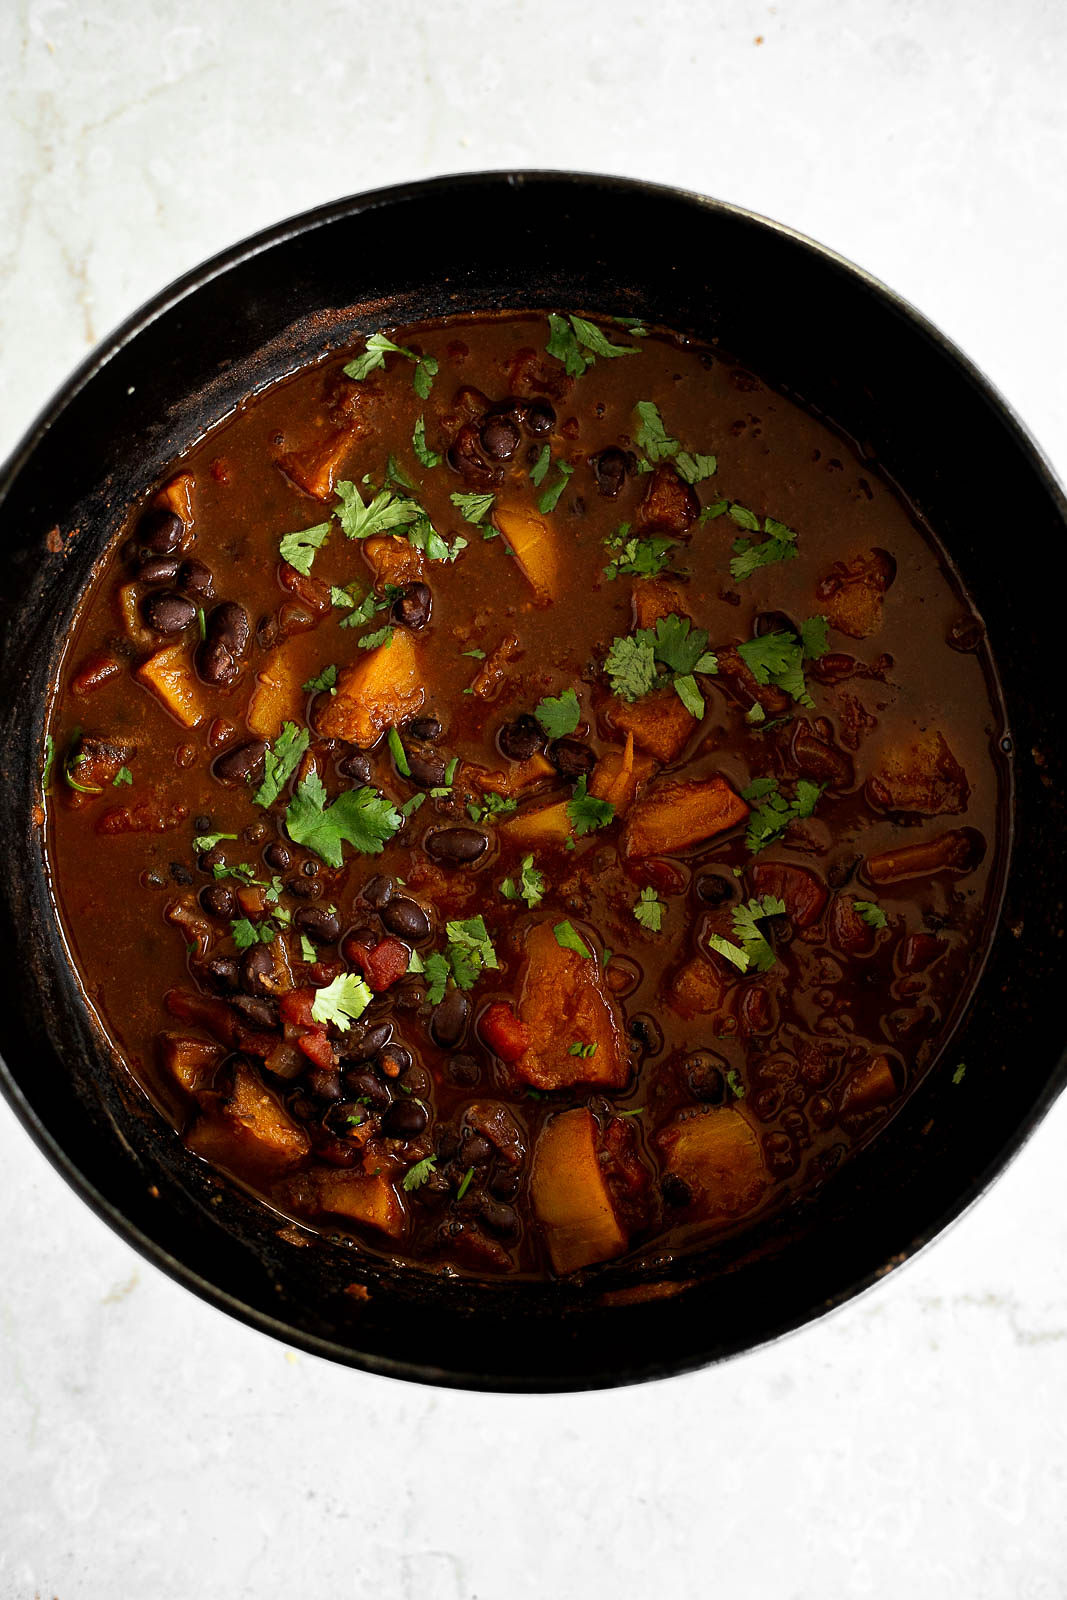 Cilantro added to black bean and butternut squash chili mixture in a Dutch oven.